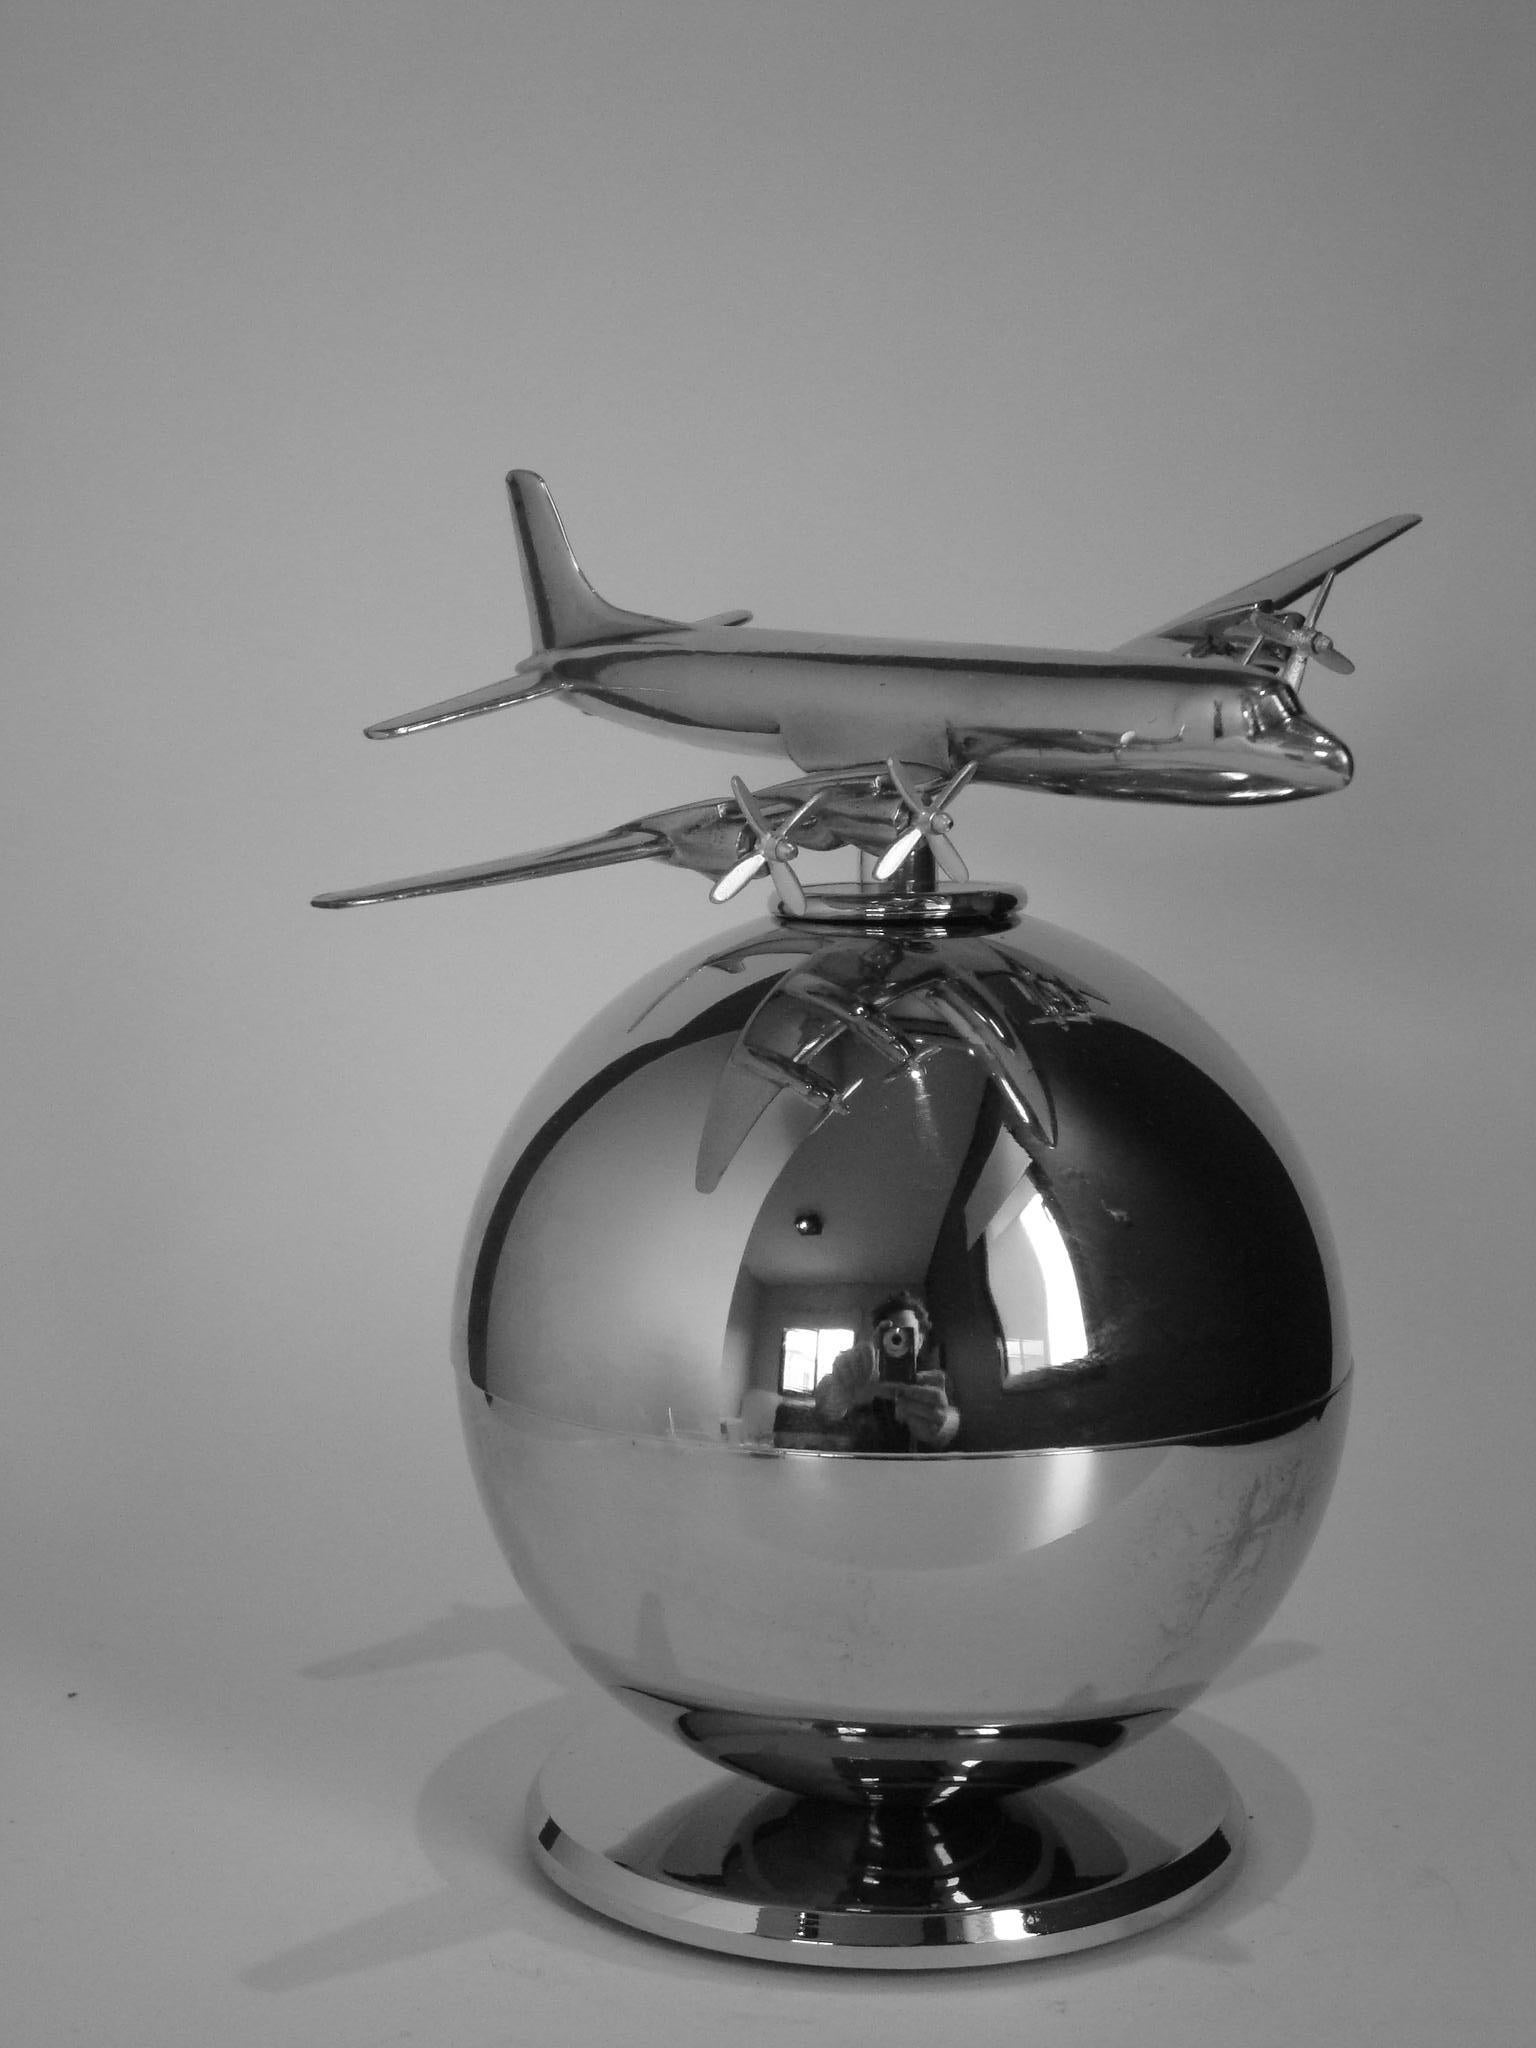 Aviation Model. Vintage aluminium display airplane model. The model is a mixture of Art Deco and midcentury design. It is mounted over a silvered ball / Globe / World.
The position of the airplane can de adjustable.
Perfect gift for any aviation